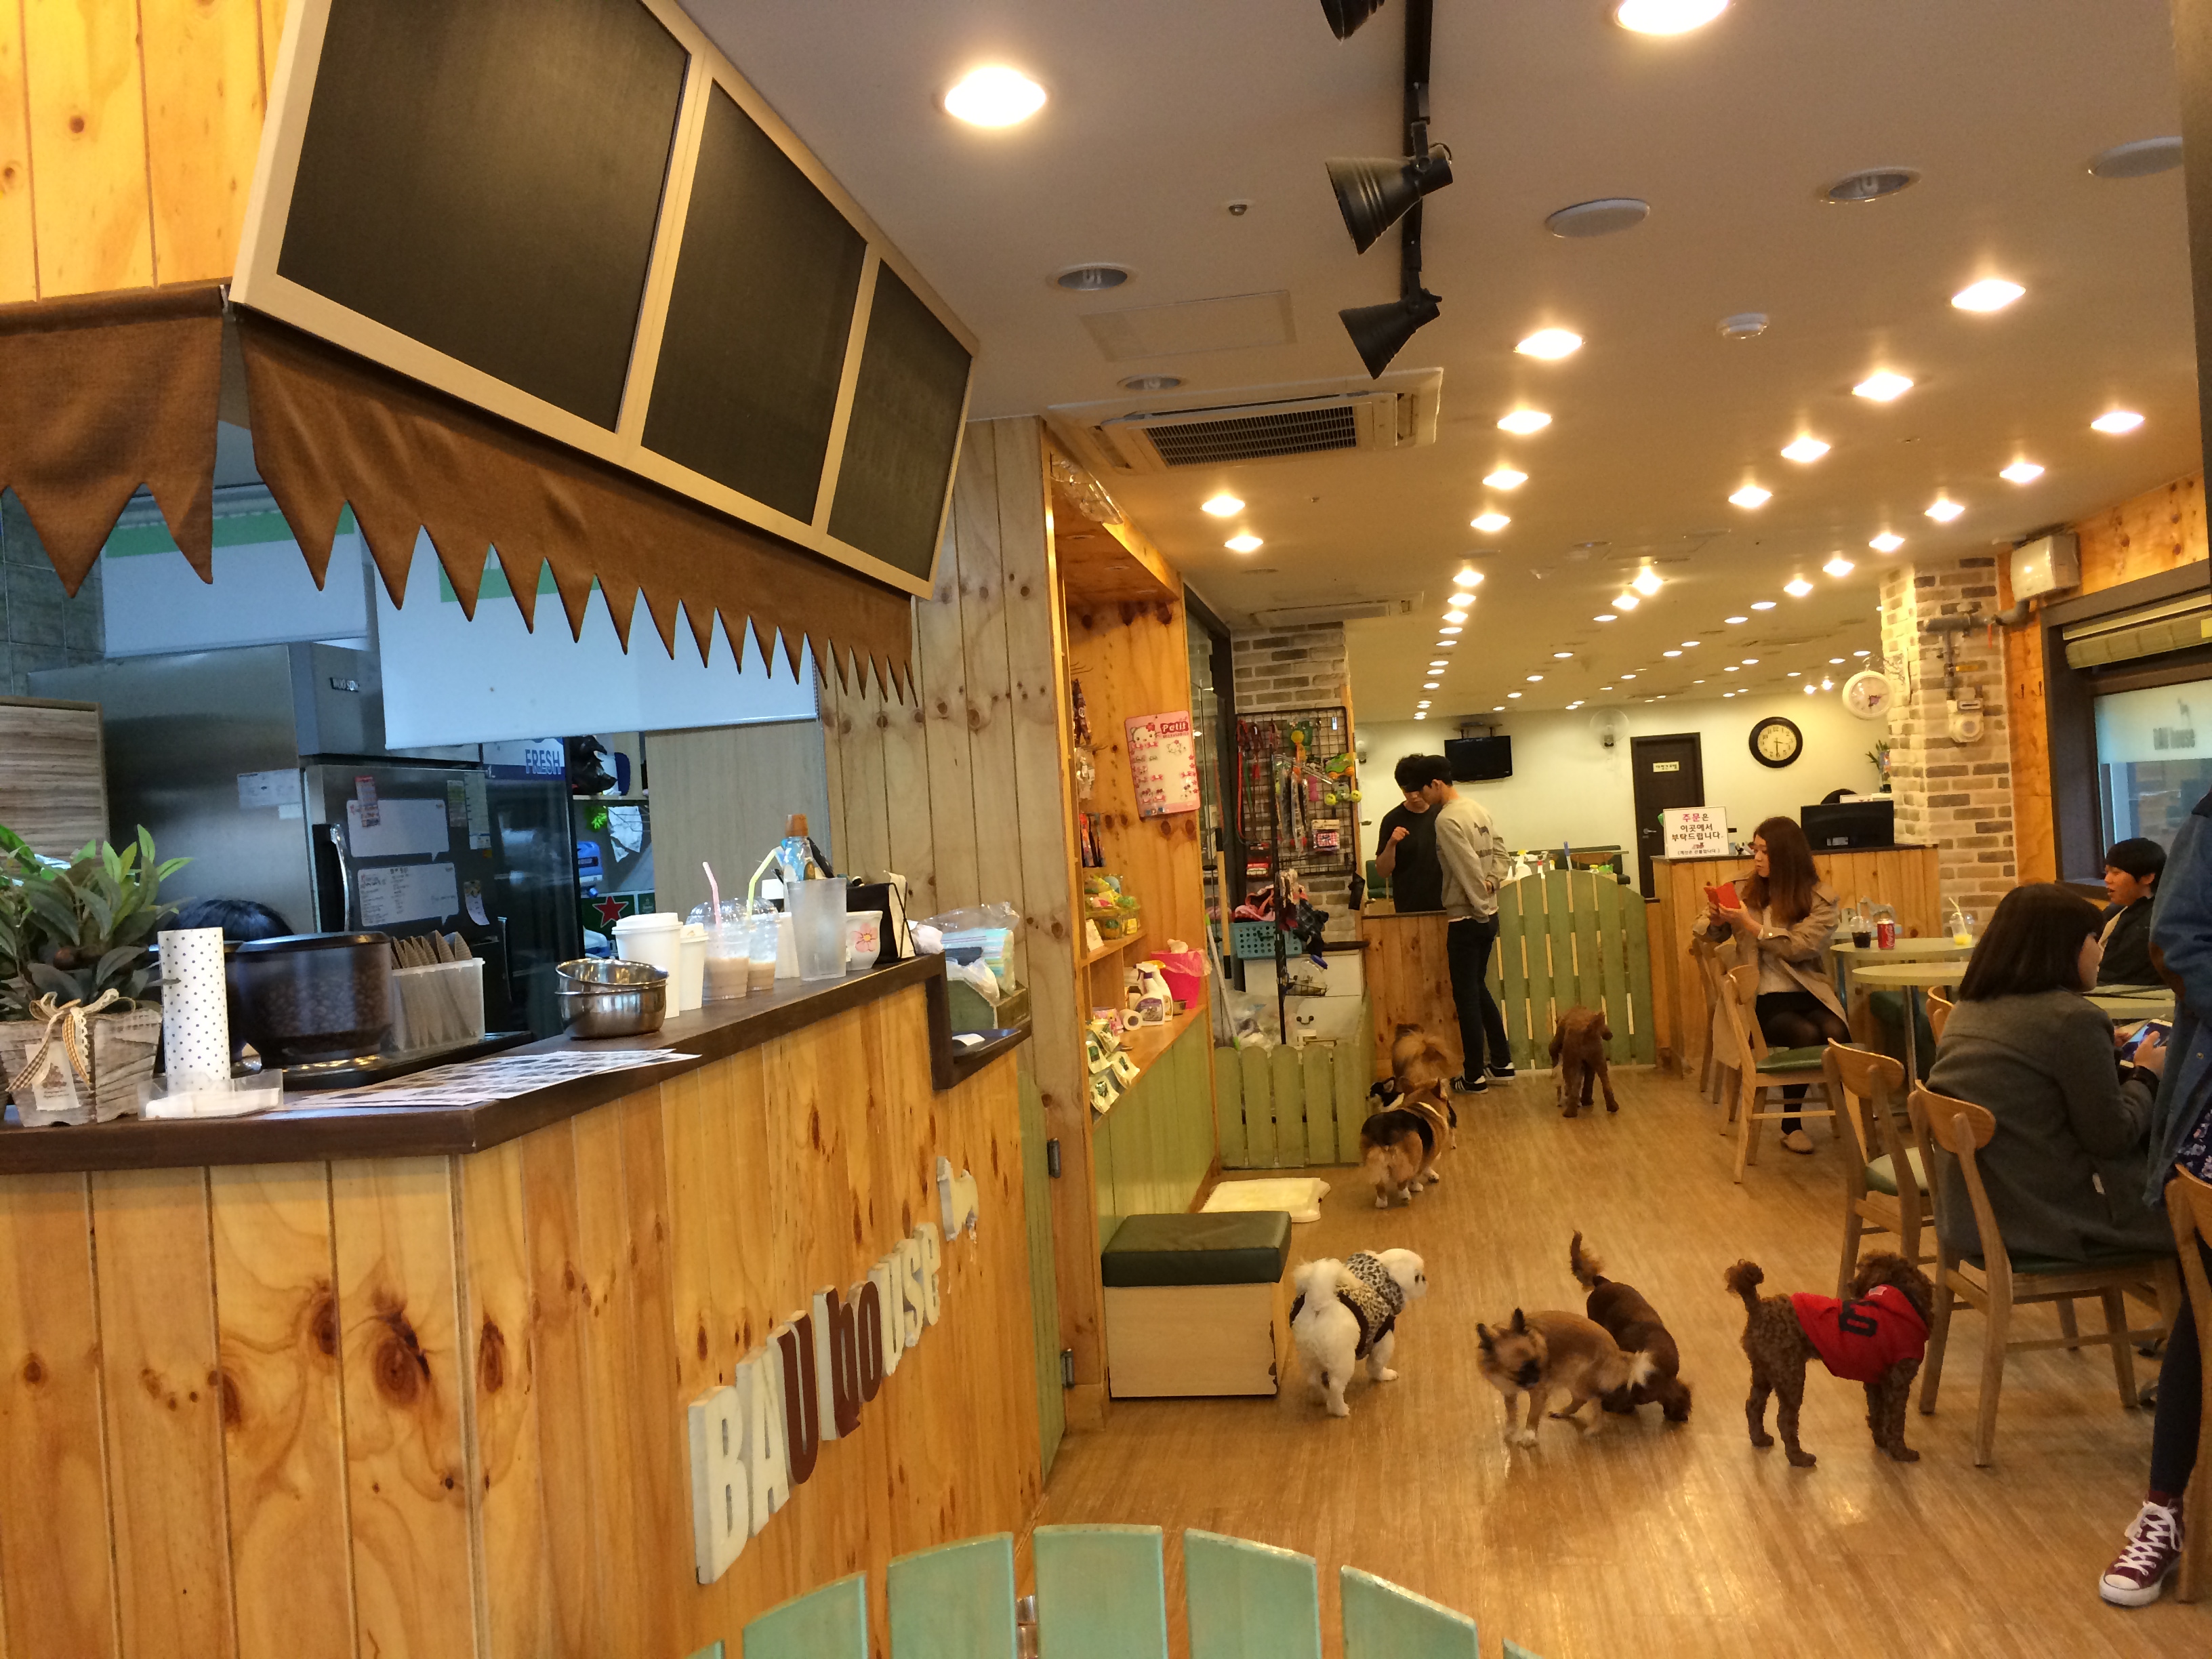 19 MARCH 2014 MY FIRST VISIT TO A DOG  CAFE  GRACING KOREA 